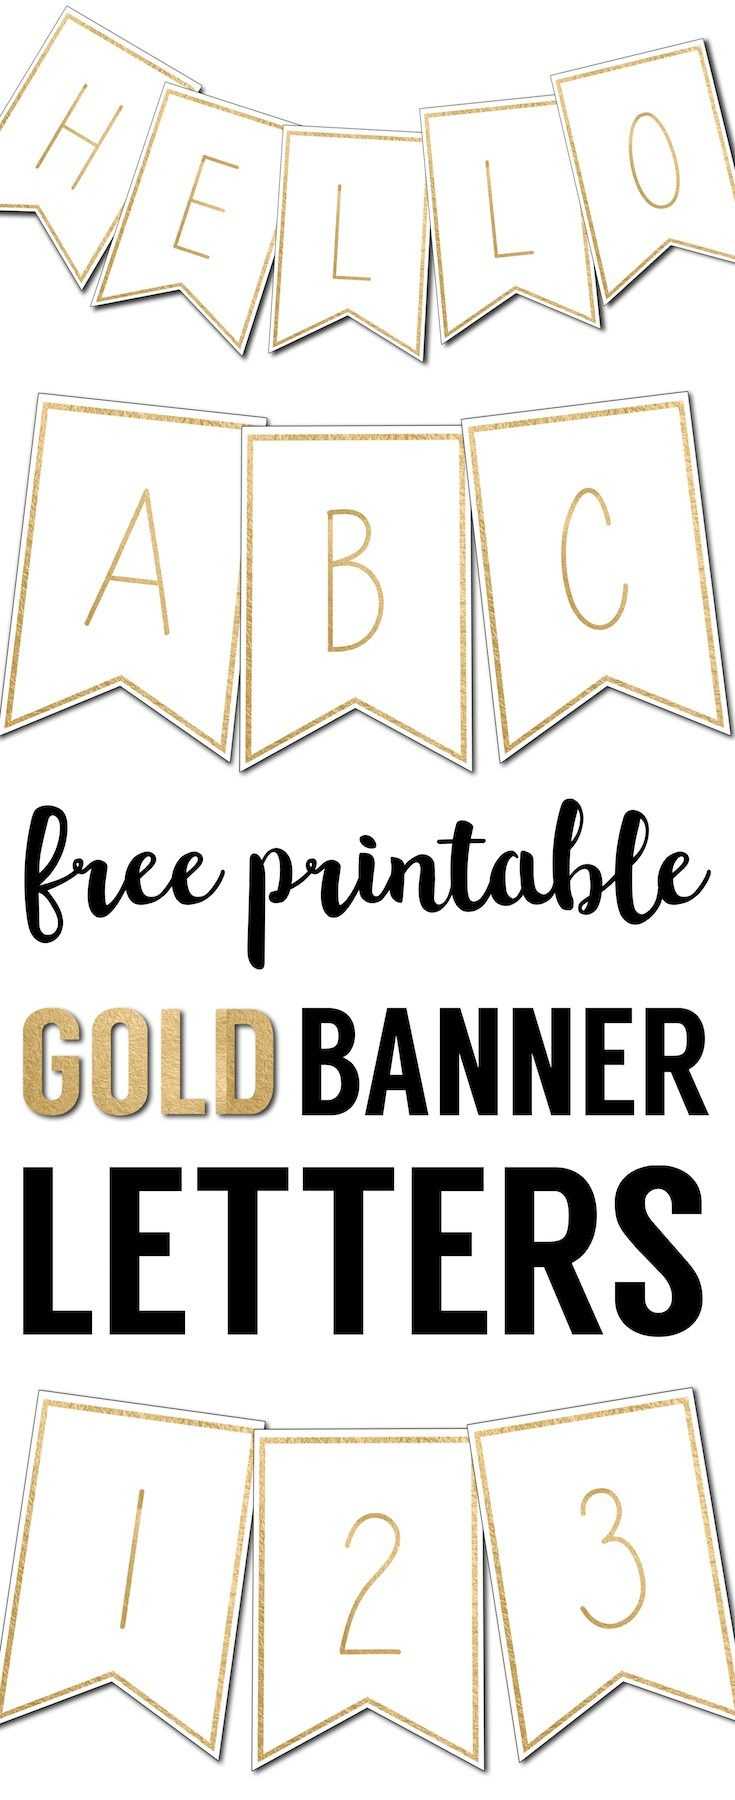 Free Printable Banner Letters Templates | Free Printable Inside Bride To Be Banner Template